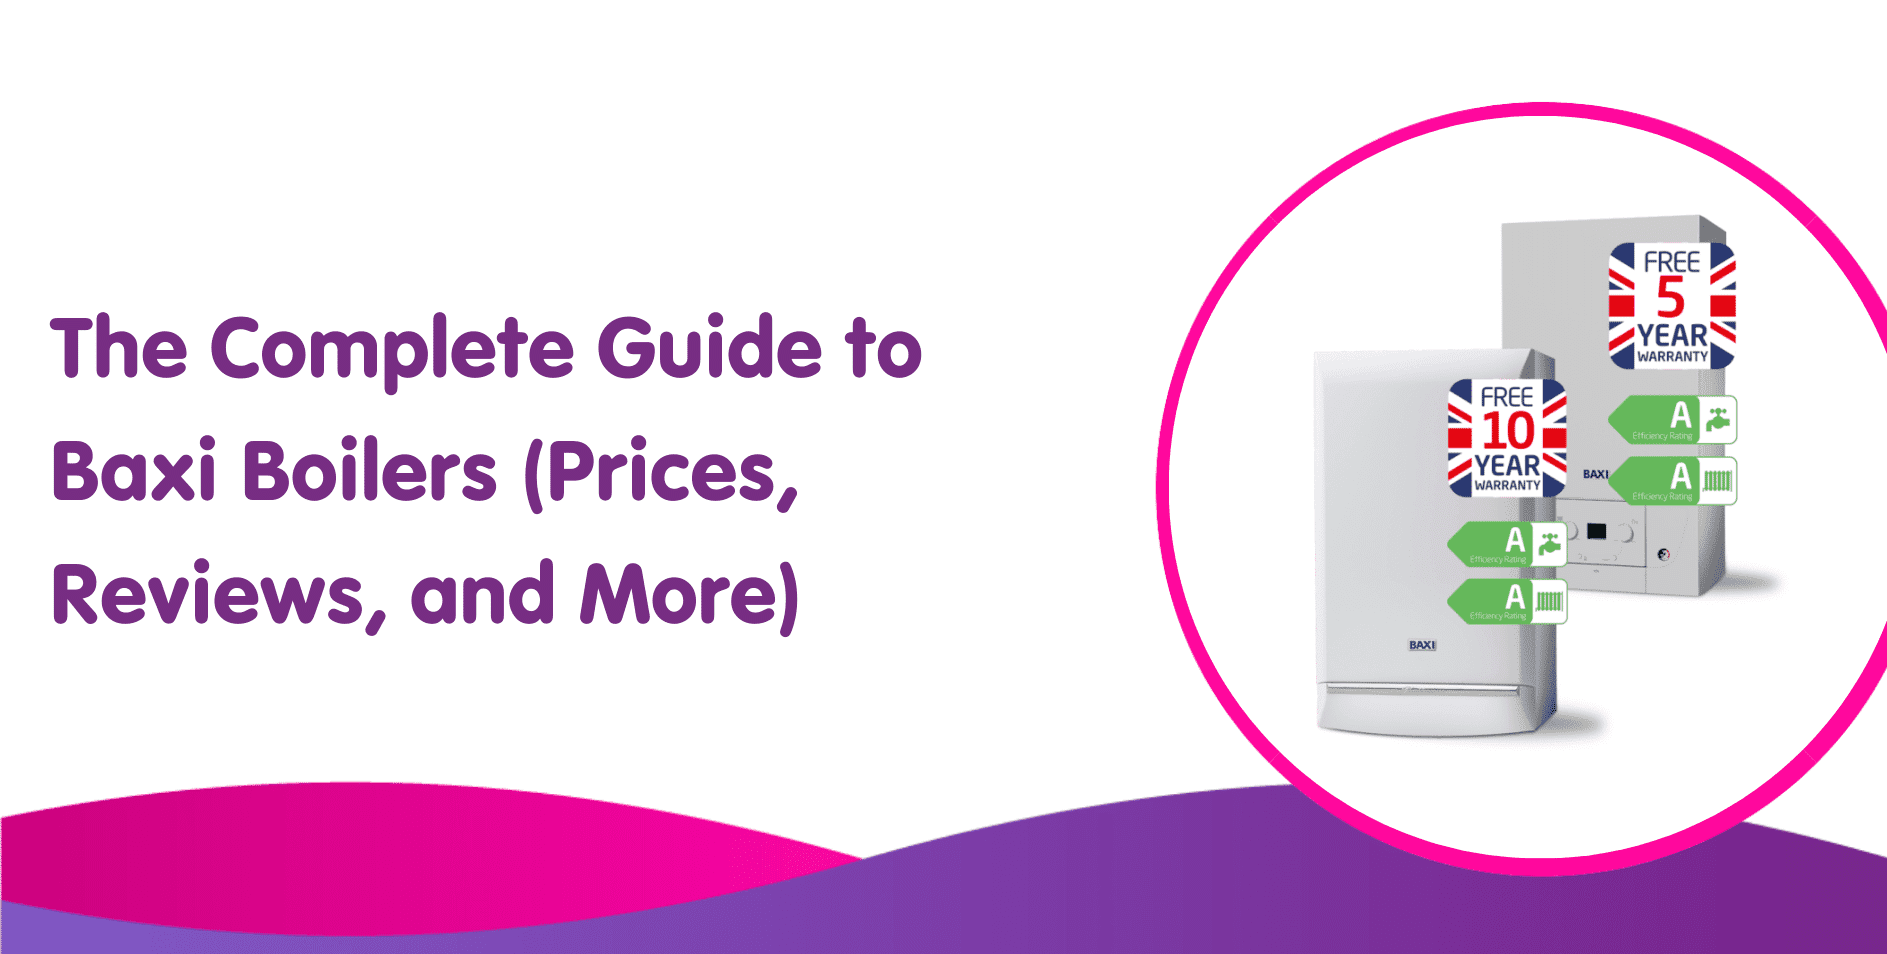 The Complete Guide to Baxi Boilers (Prices, Reviews, and More)